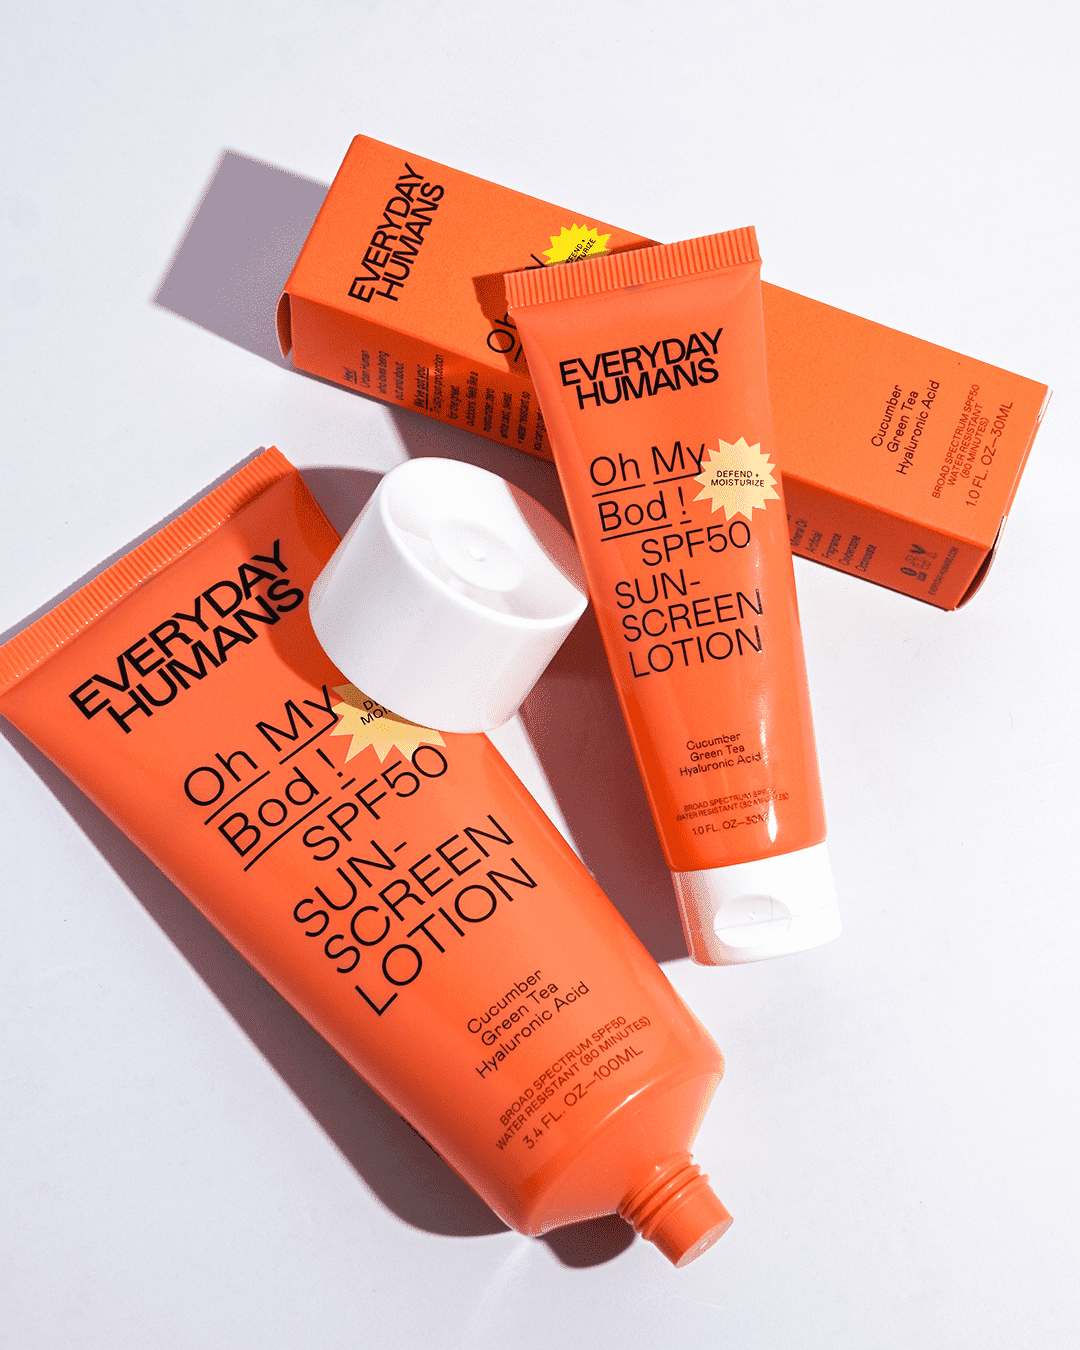 Oh My Bod! SPF50 Sunscreen Lotion Finished Goods Everyday Humans 